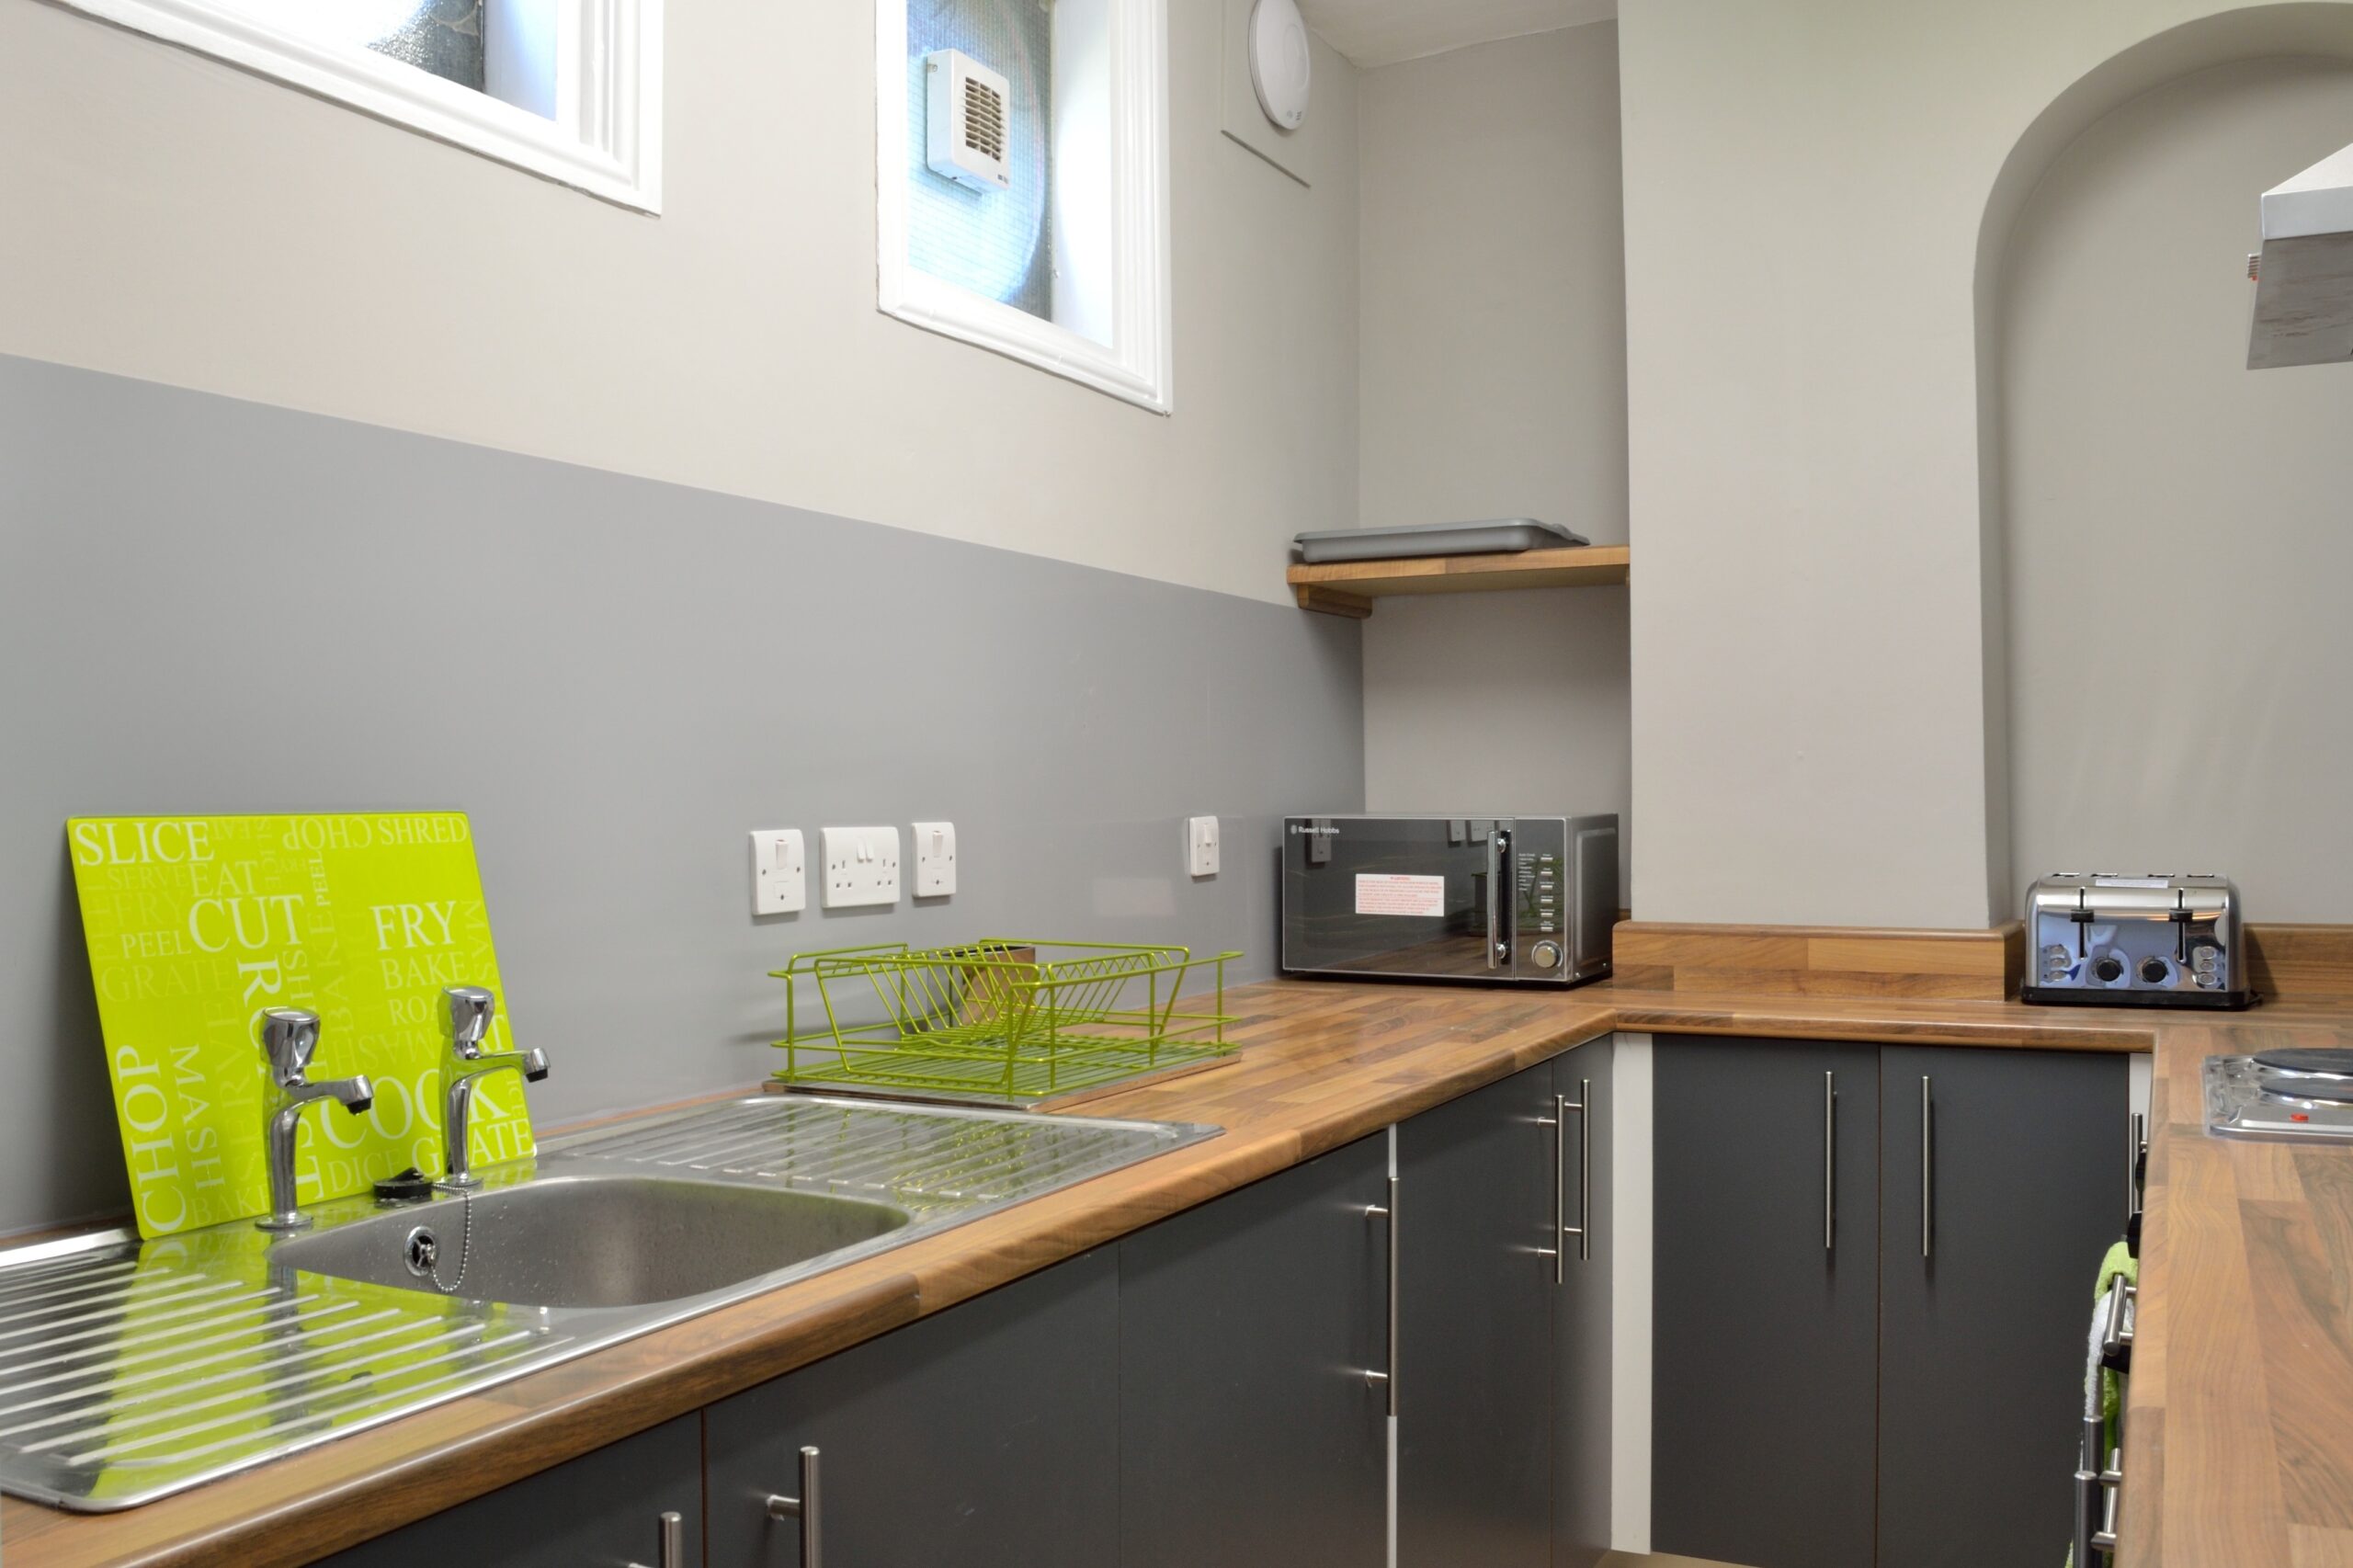 Kitchen with grey units, wooden worktops, sink, microwave and toaster